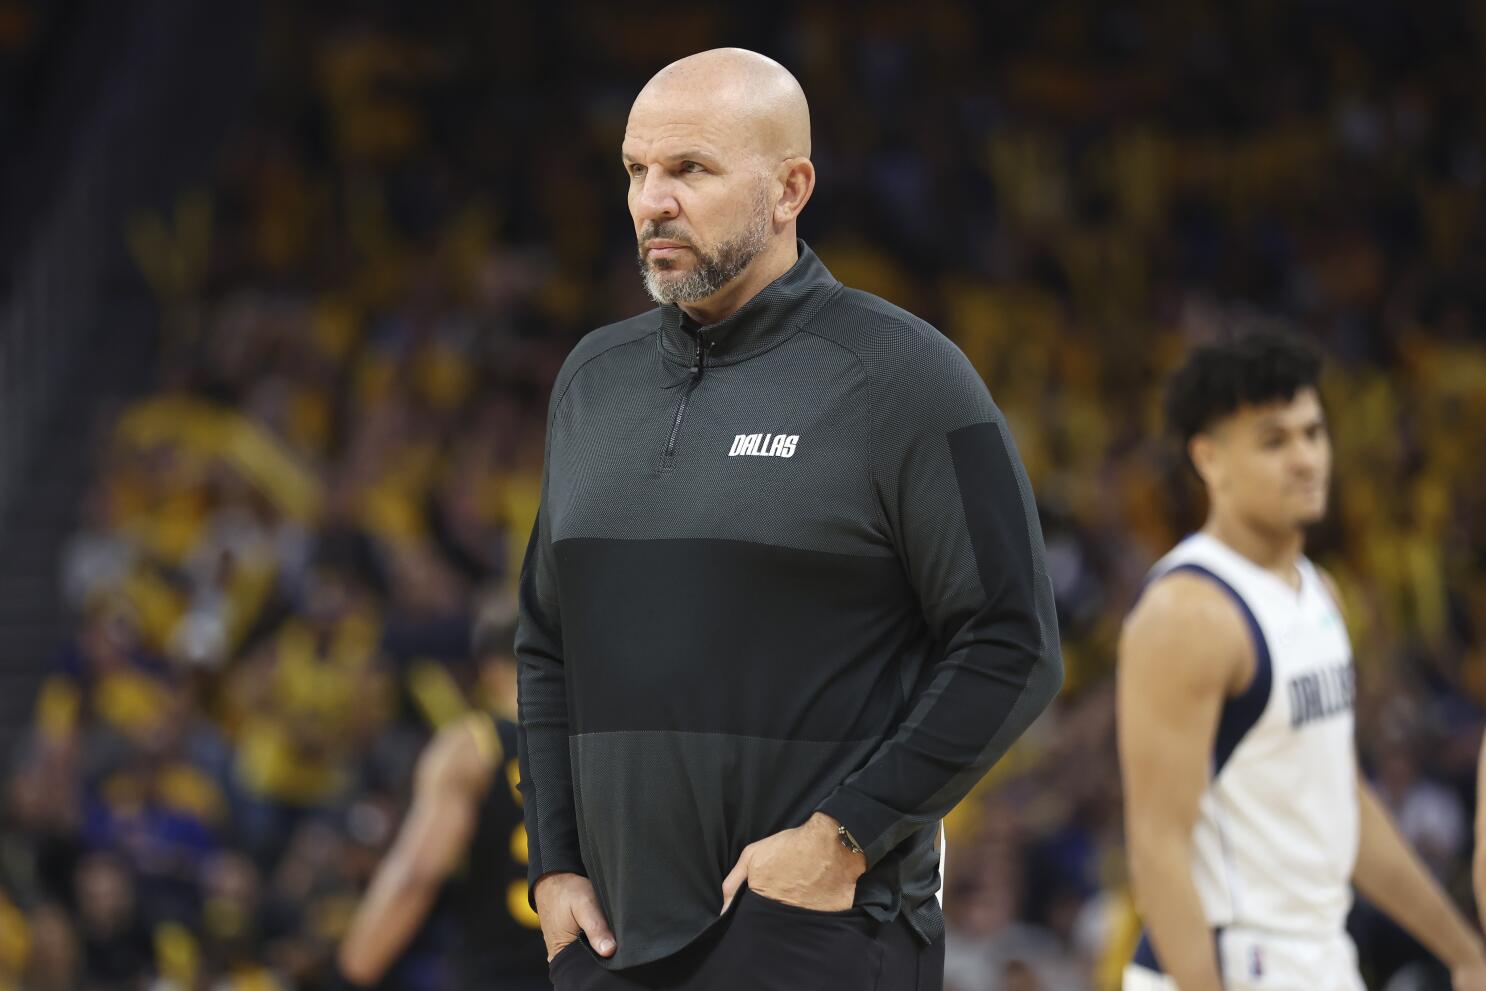 Jason Kidd Nearly Signed With San Antonio Spurs After New Jersey